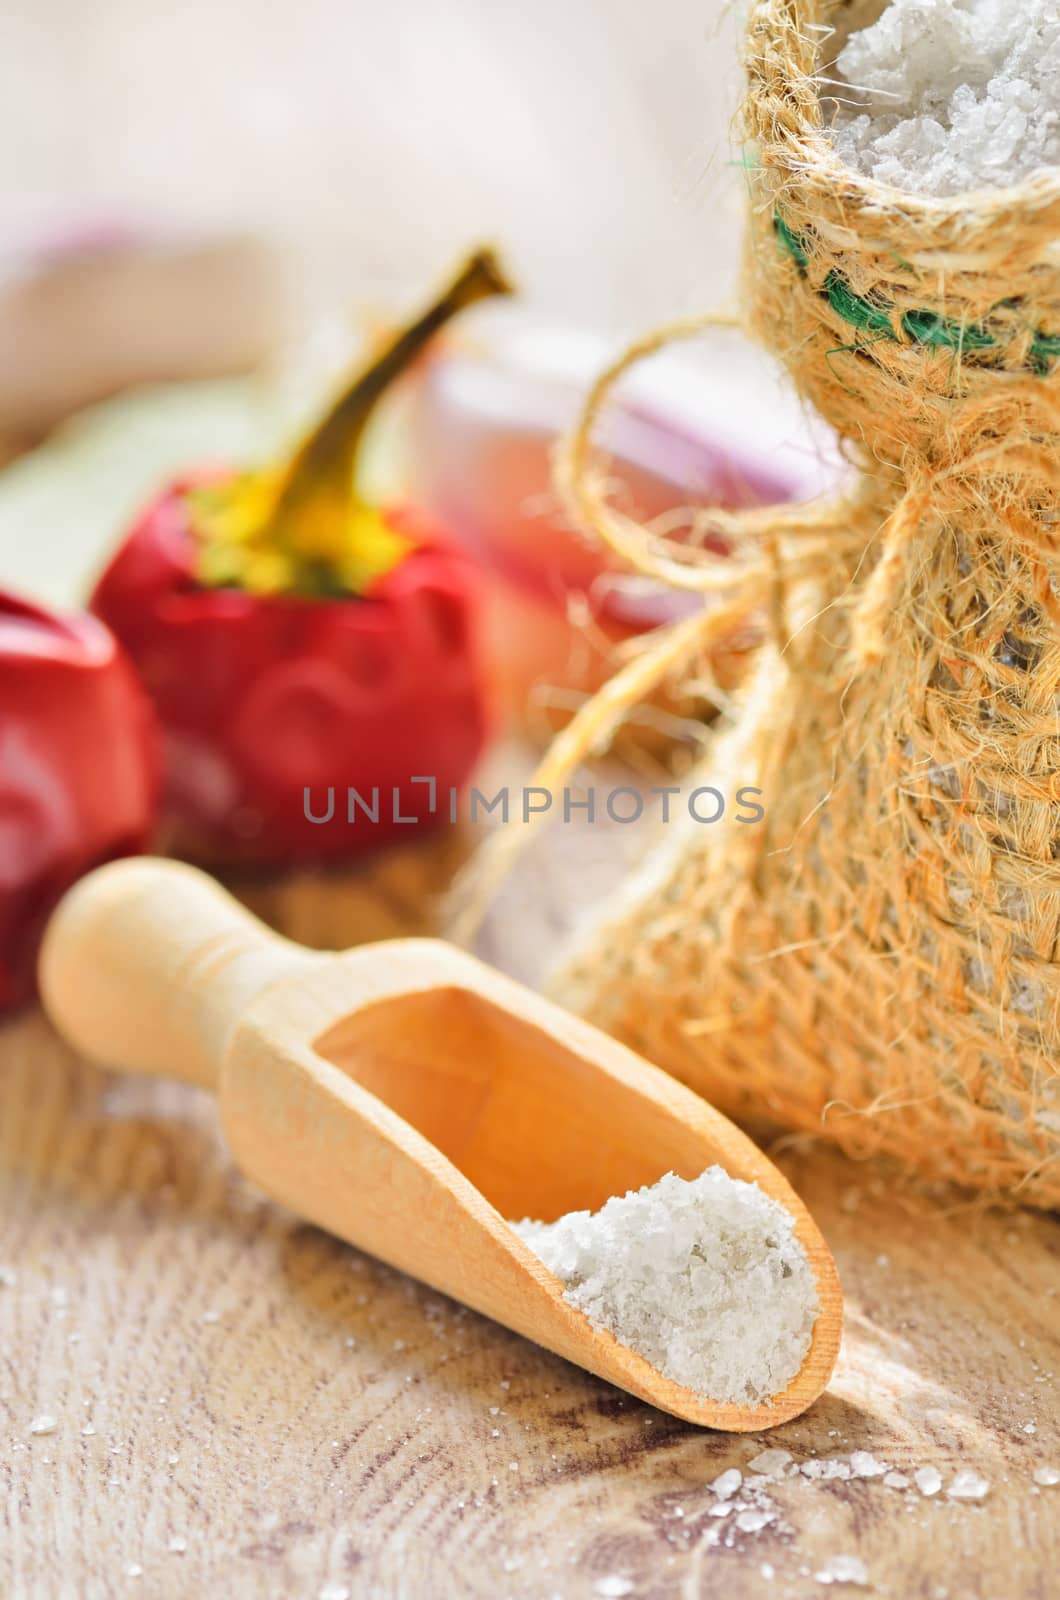 sea salt and spices by mady70